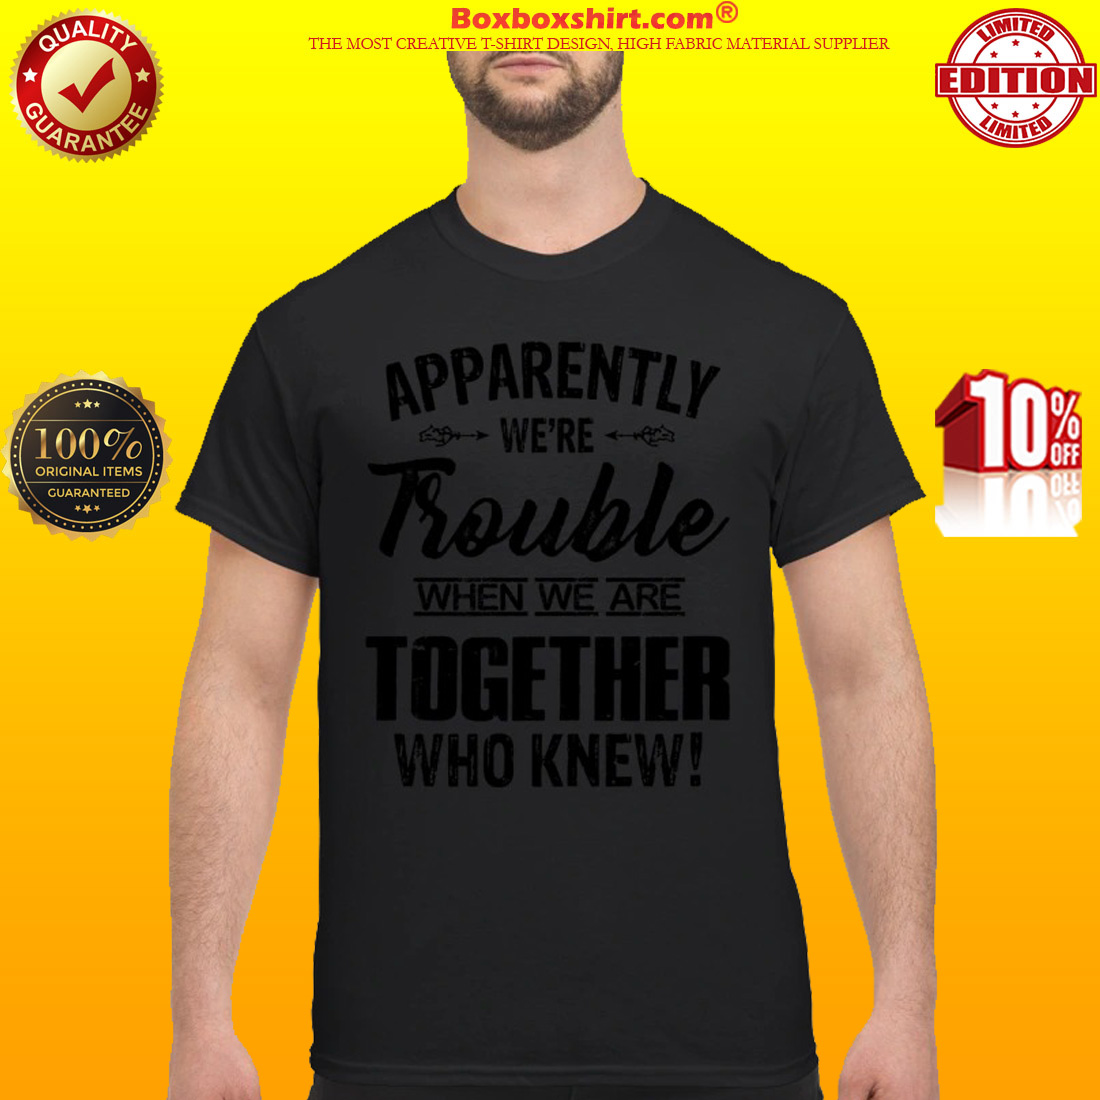 Apparently we're trouble when we are together who know classic shirt